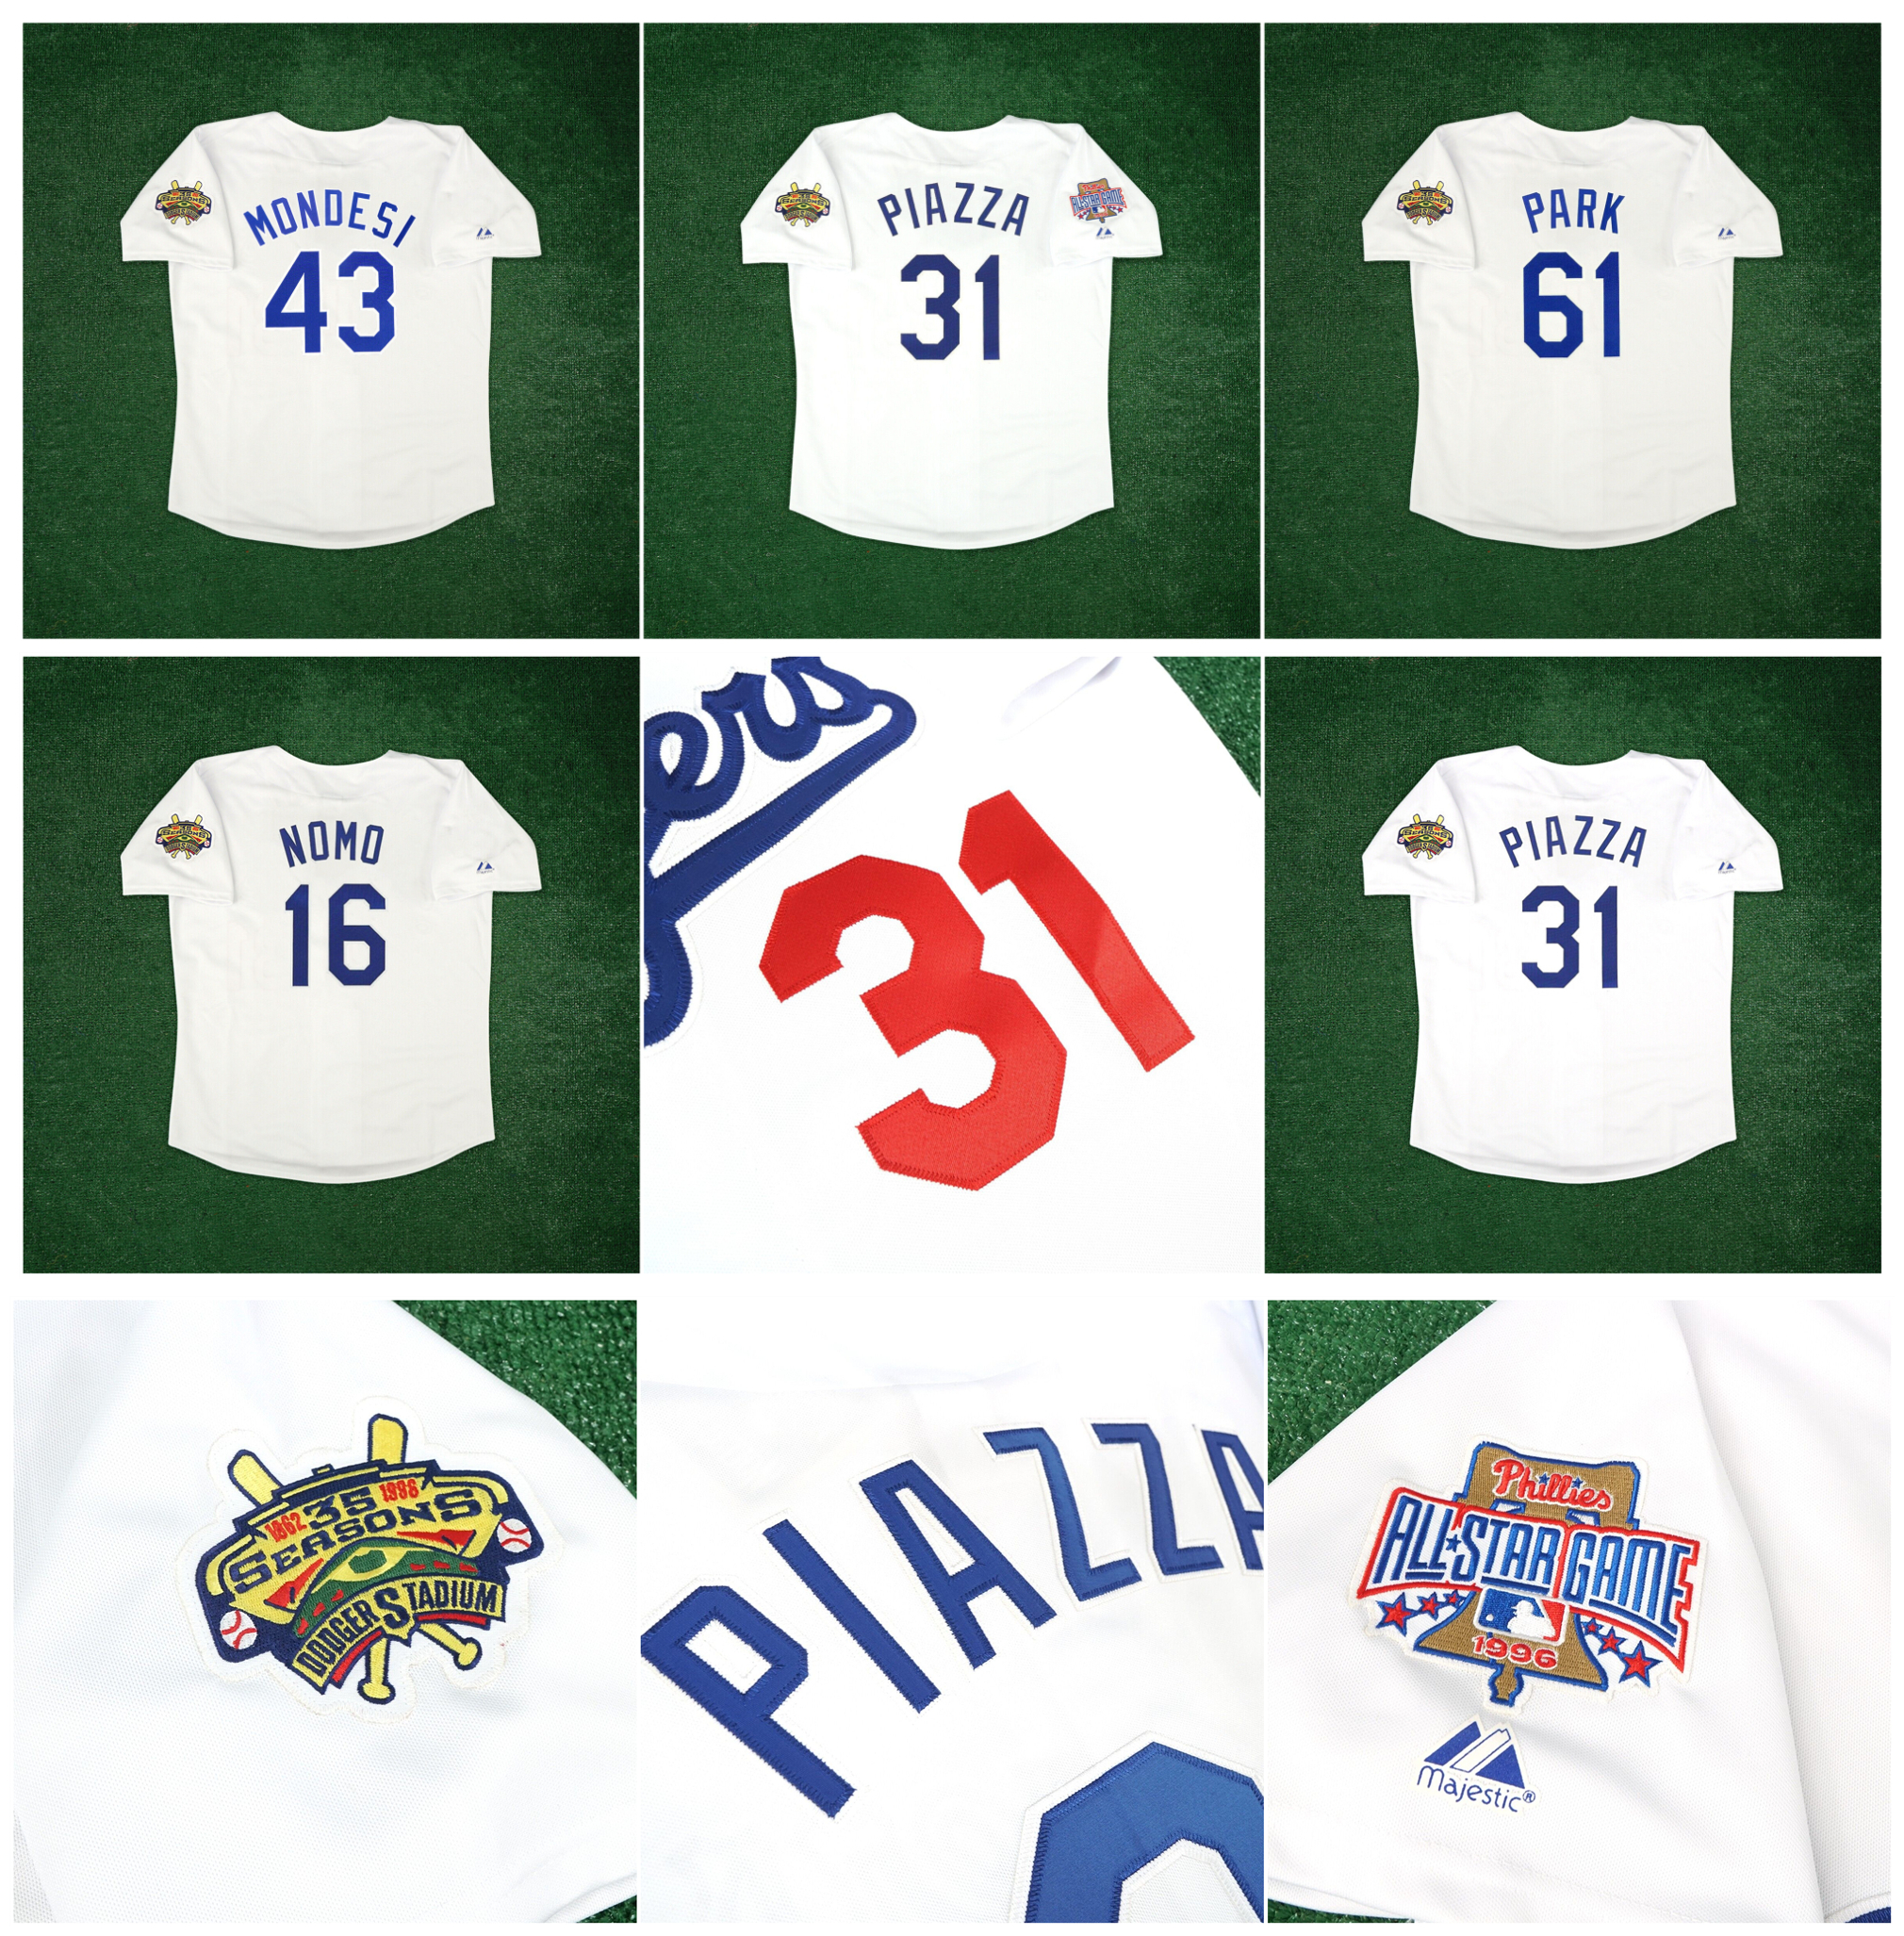 

Dodgers Chan Ho Park 1996 Baseball Jersey Los Cooperstown LA Angeles Raul Mondesi Hideo Nomo Mike 31 Piazza 30th Anniv Home White Size S-4XL, As pic